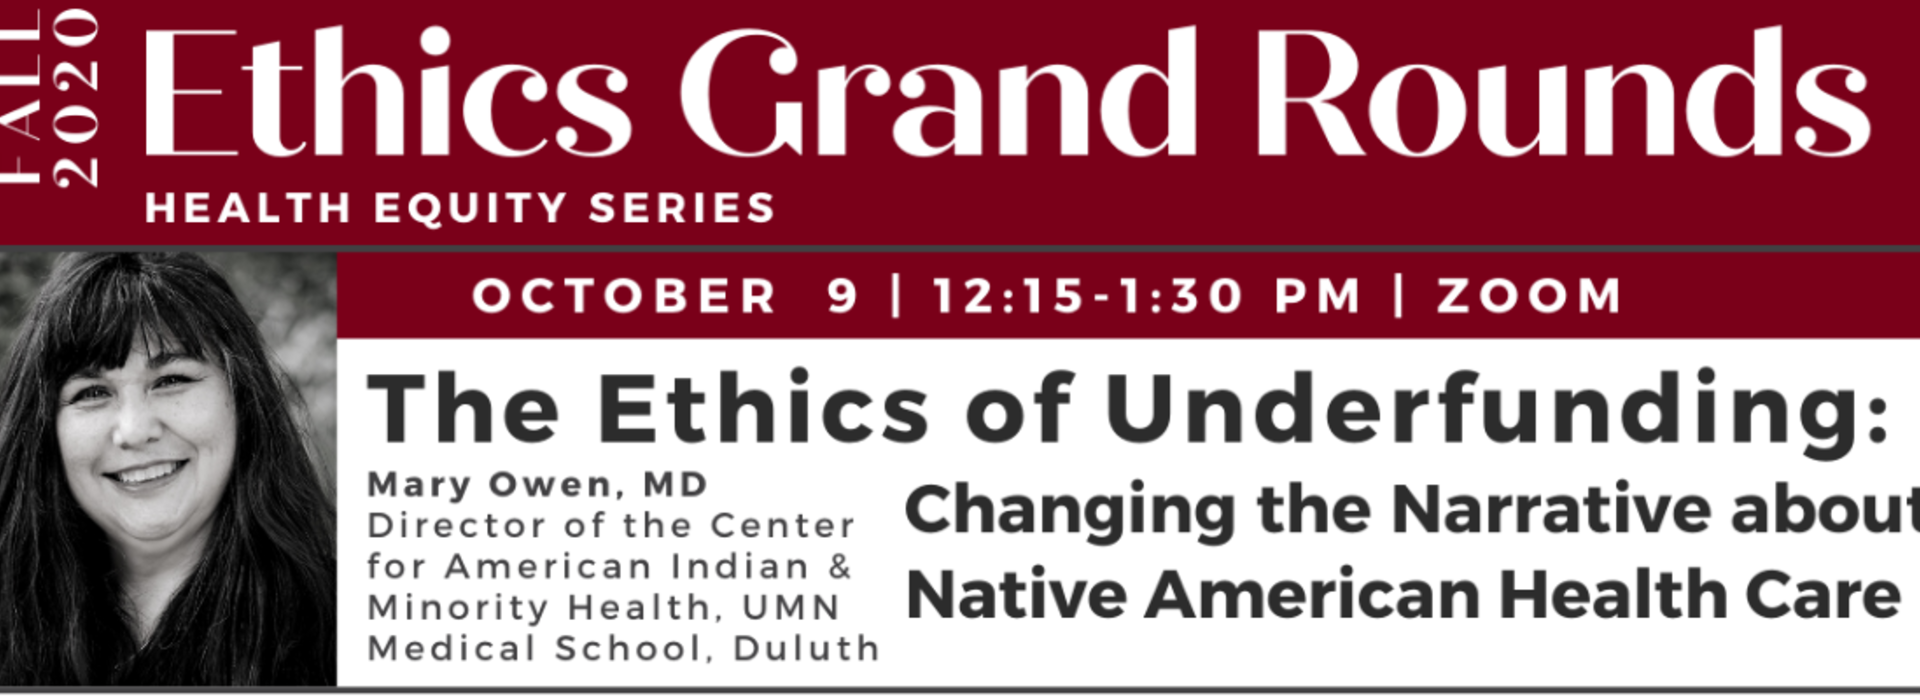 October 9 installment of the Ethics Grand Rounds Series on changing the narrative about Native American healthcare. 